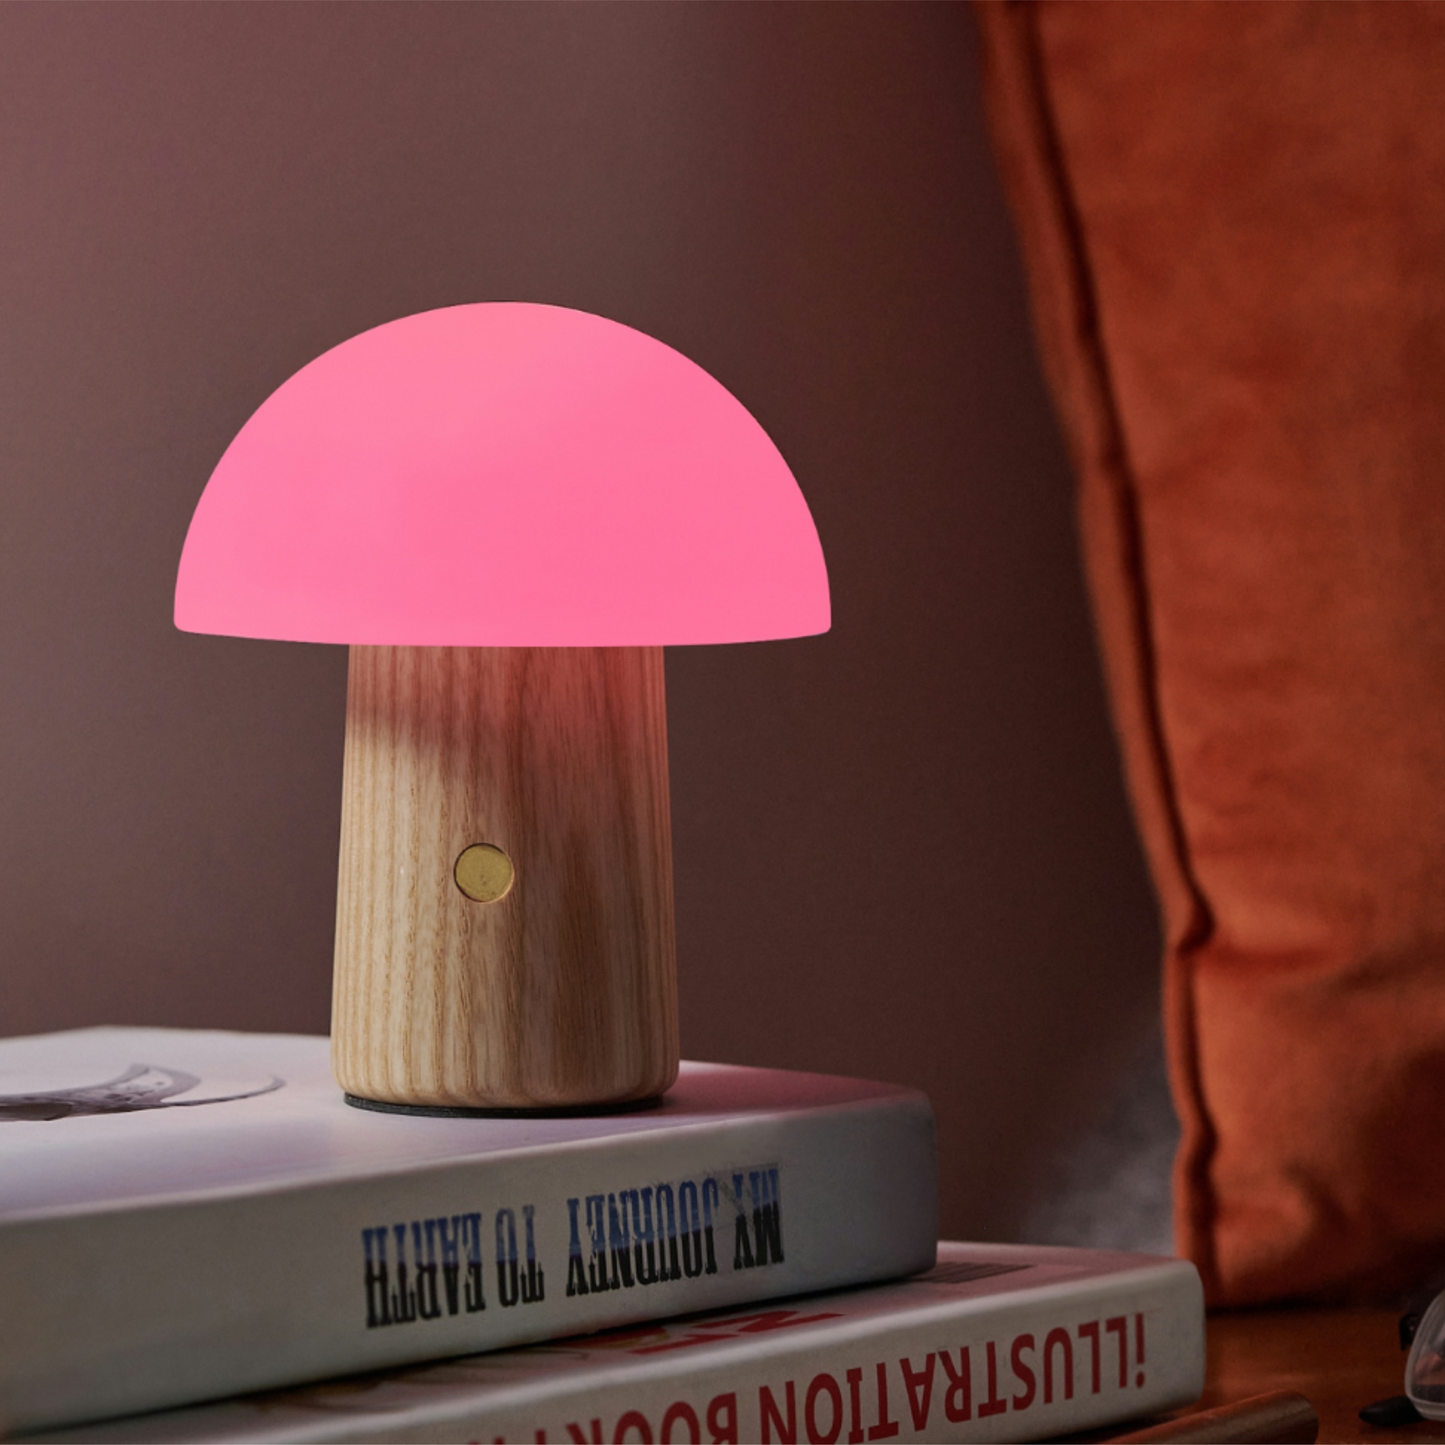 A mushroom shaped small lamp with a wooden base placed on top of a stack of books.